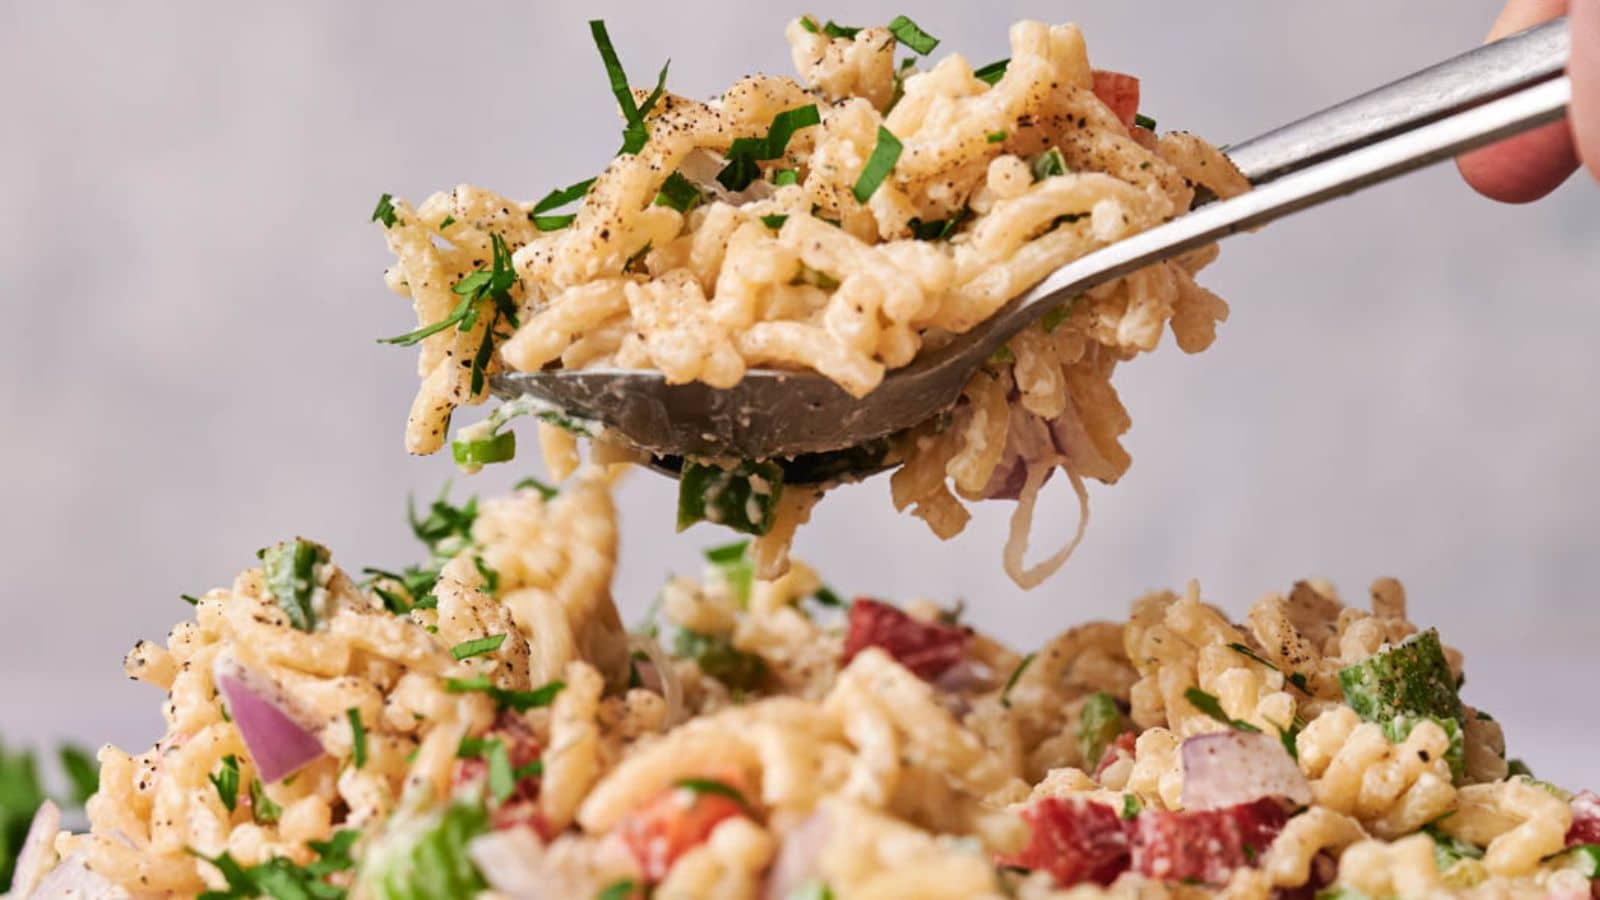 A spoon lifting a serving of creamy macaroni salad with diced red onion and fresh herbs, with pepper sprinkled on top.